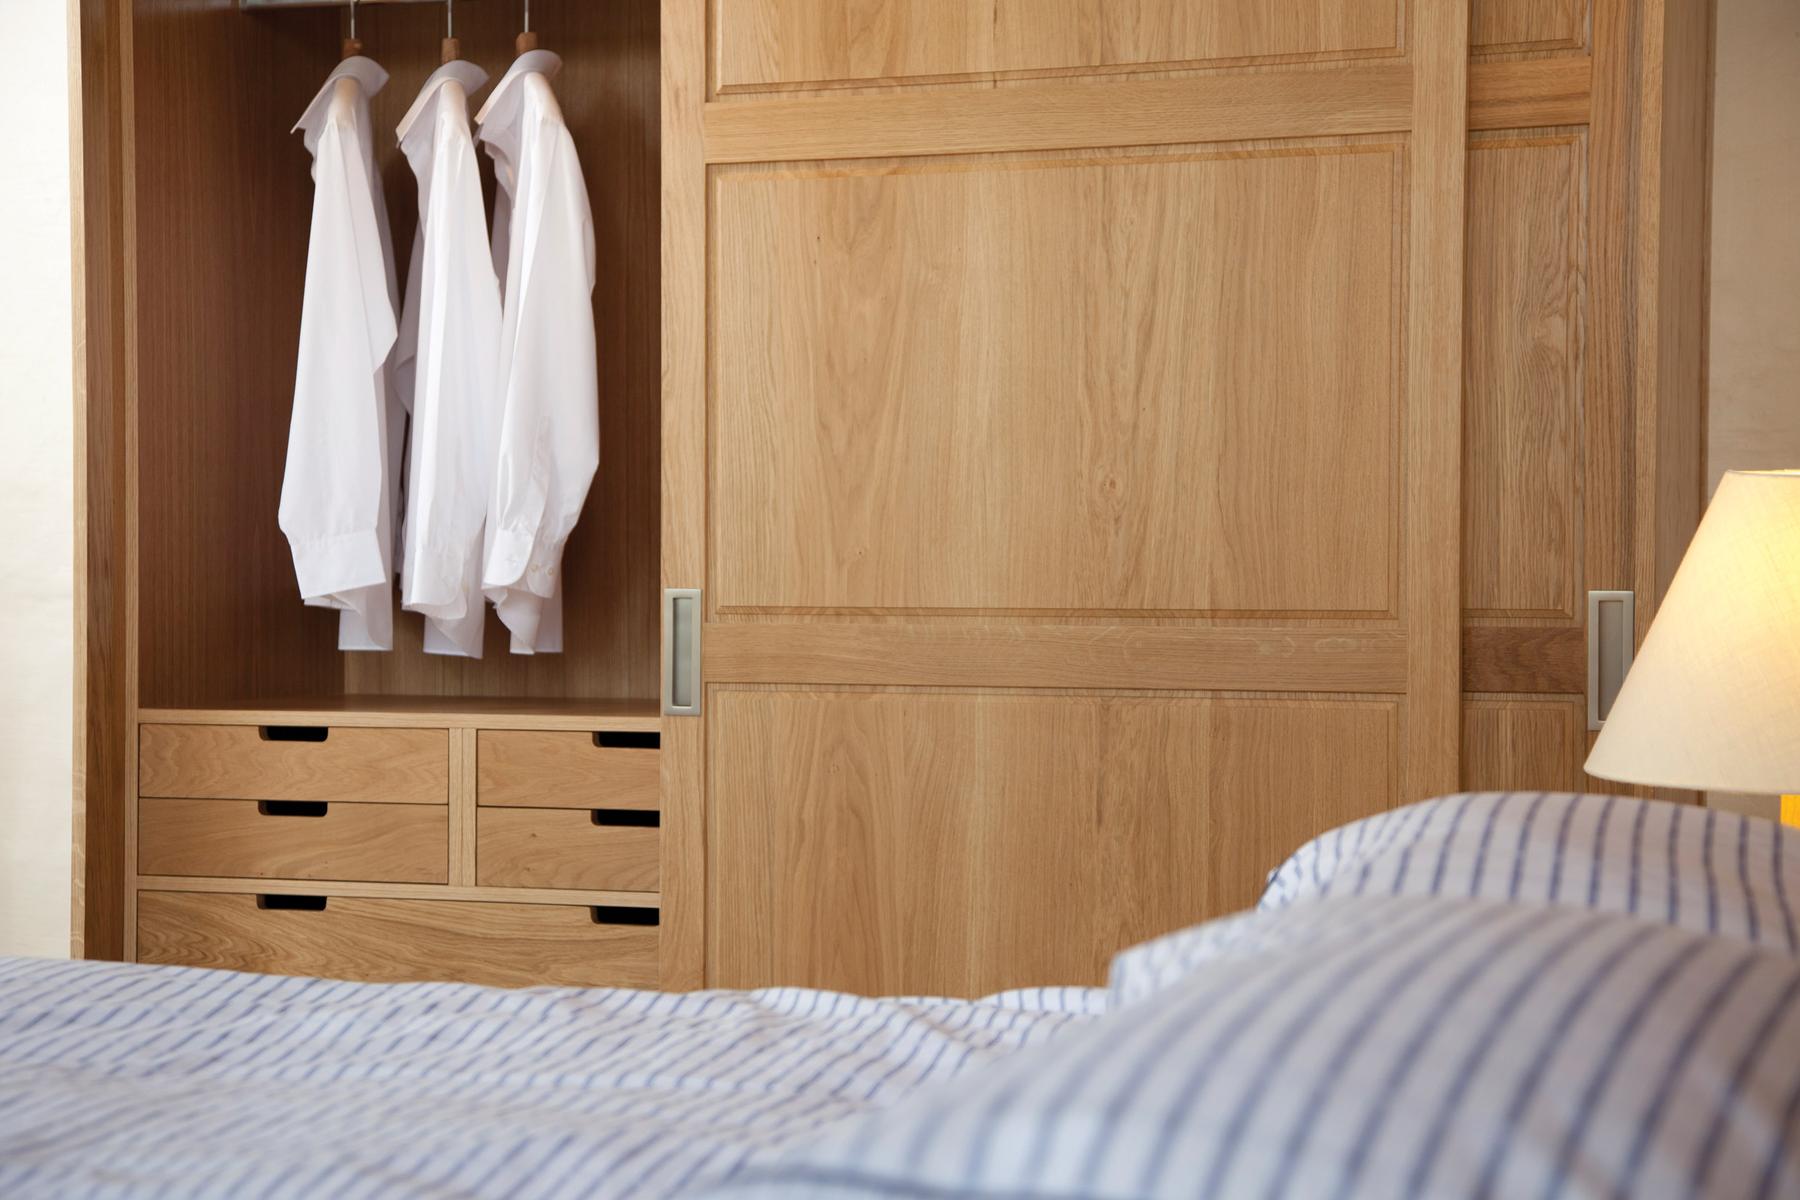 Helmsley Fitted Bedroom Furniture